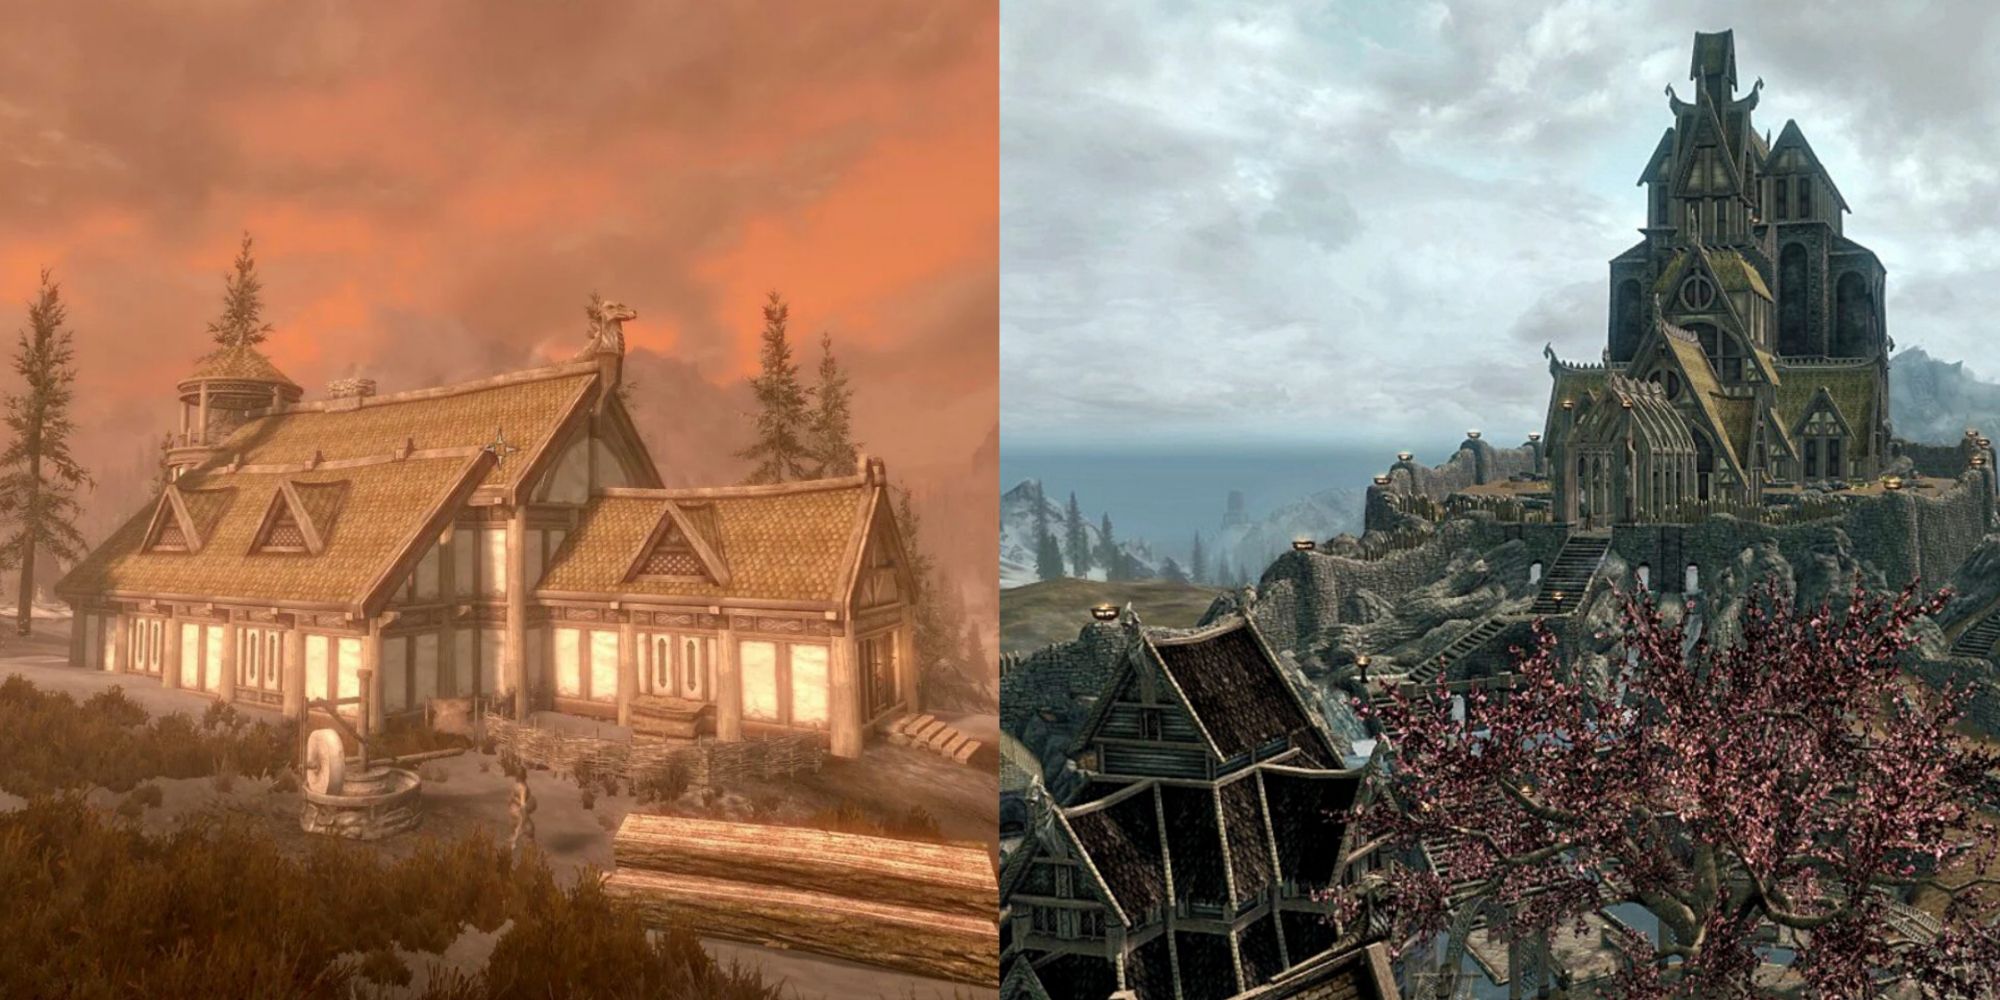 skyrim Heljarchen Hall - View of the Hall at sunset (left), whiterun as seen from above (right)